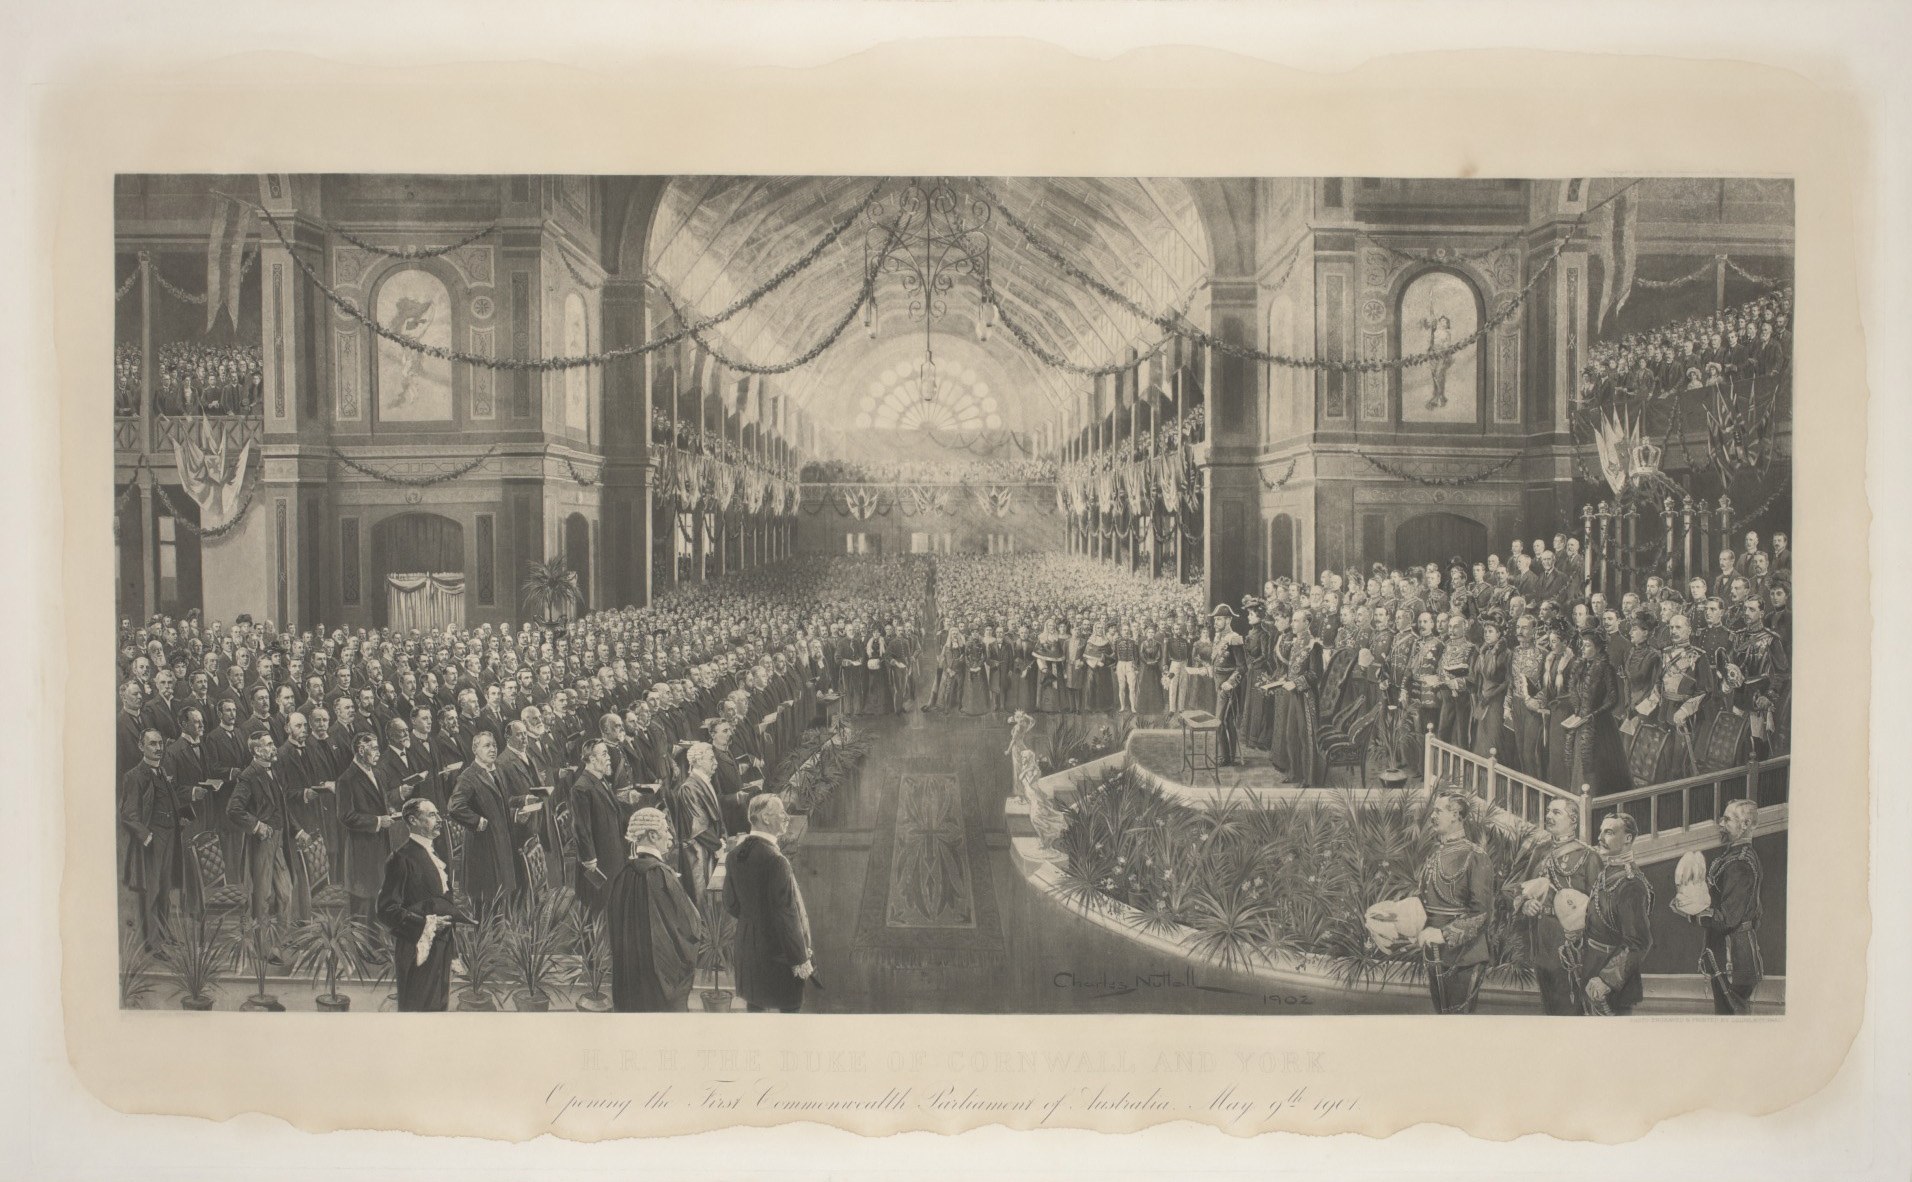 Opening of First Commonwealth Parliament, by artist Charles Nuttall, 1902. 